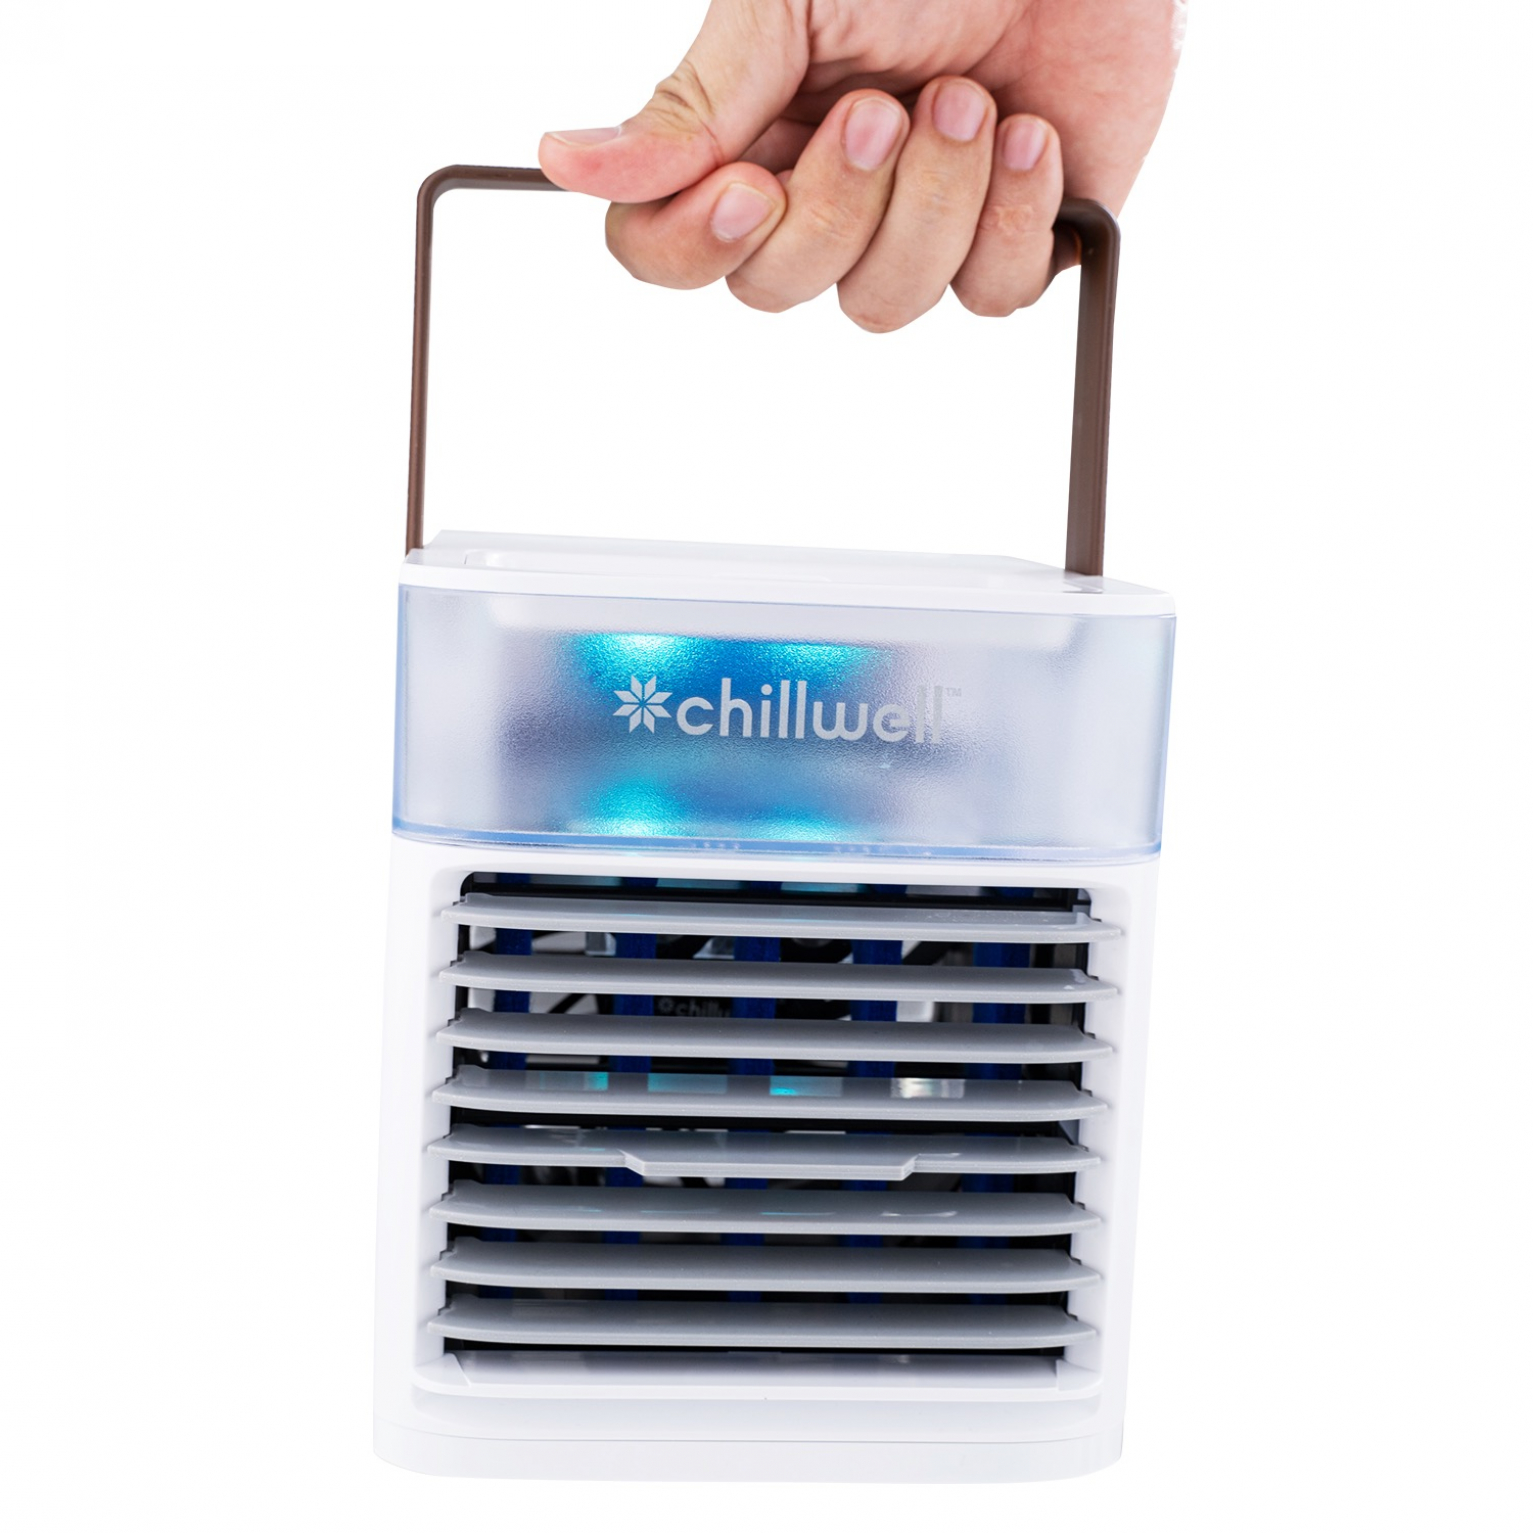 Chillwell AC Reviews Consumer Reports Complaints